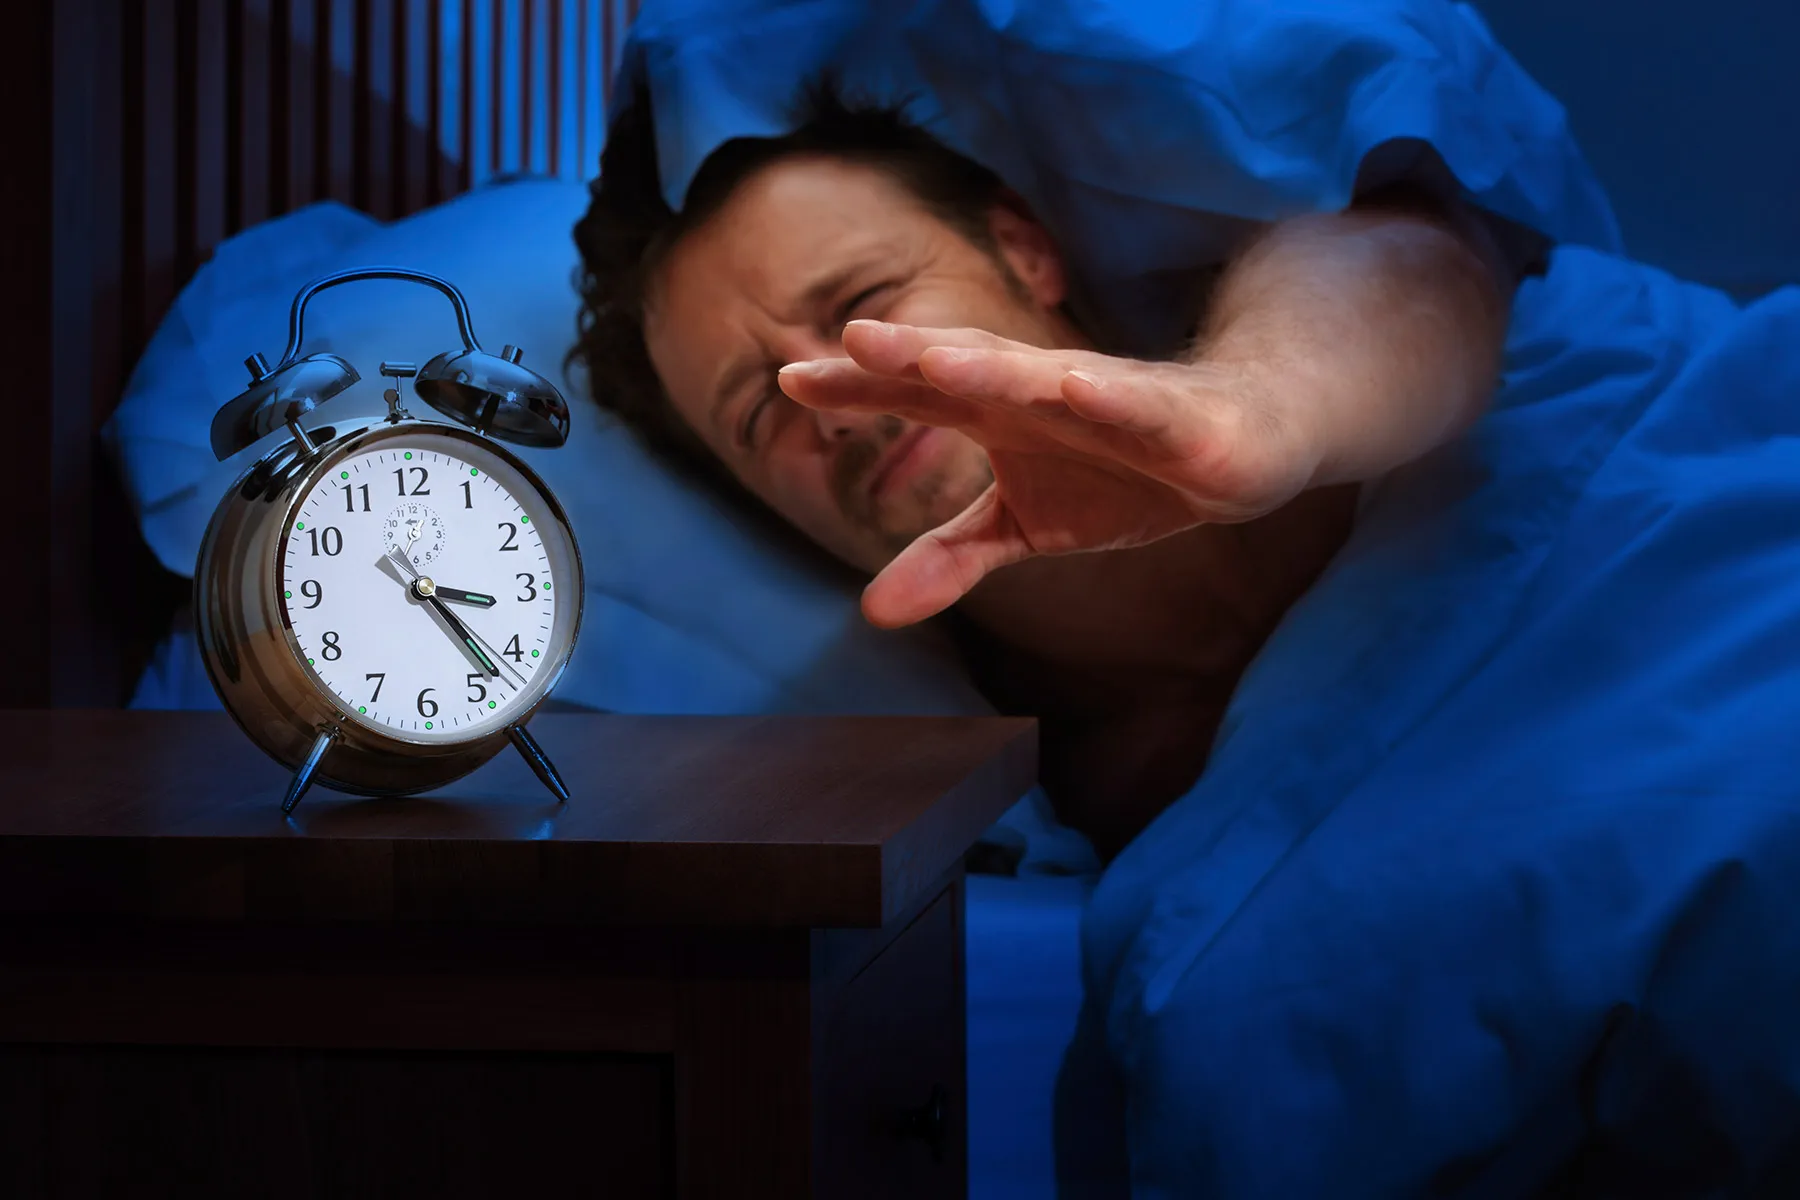 An Hour at What Cost? The Harmful Effects of Daylight Savings